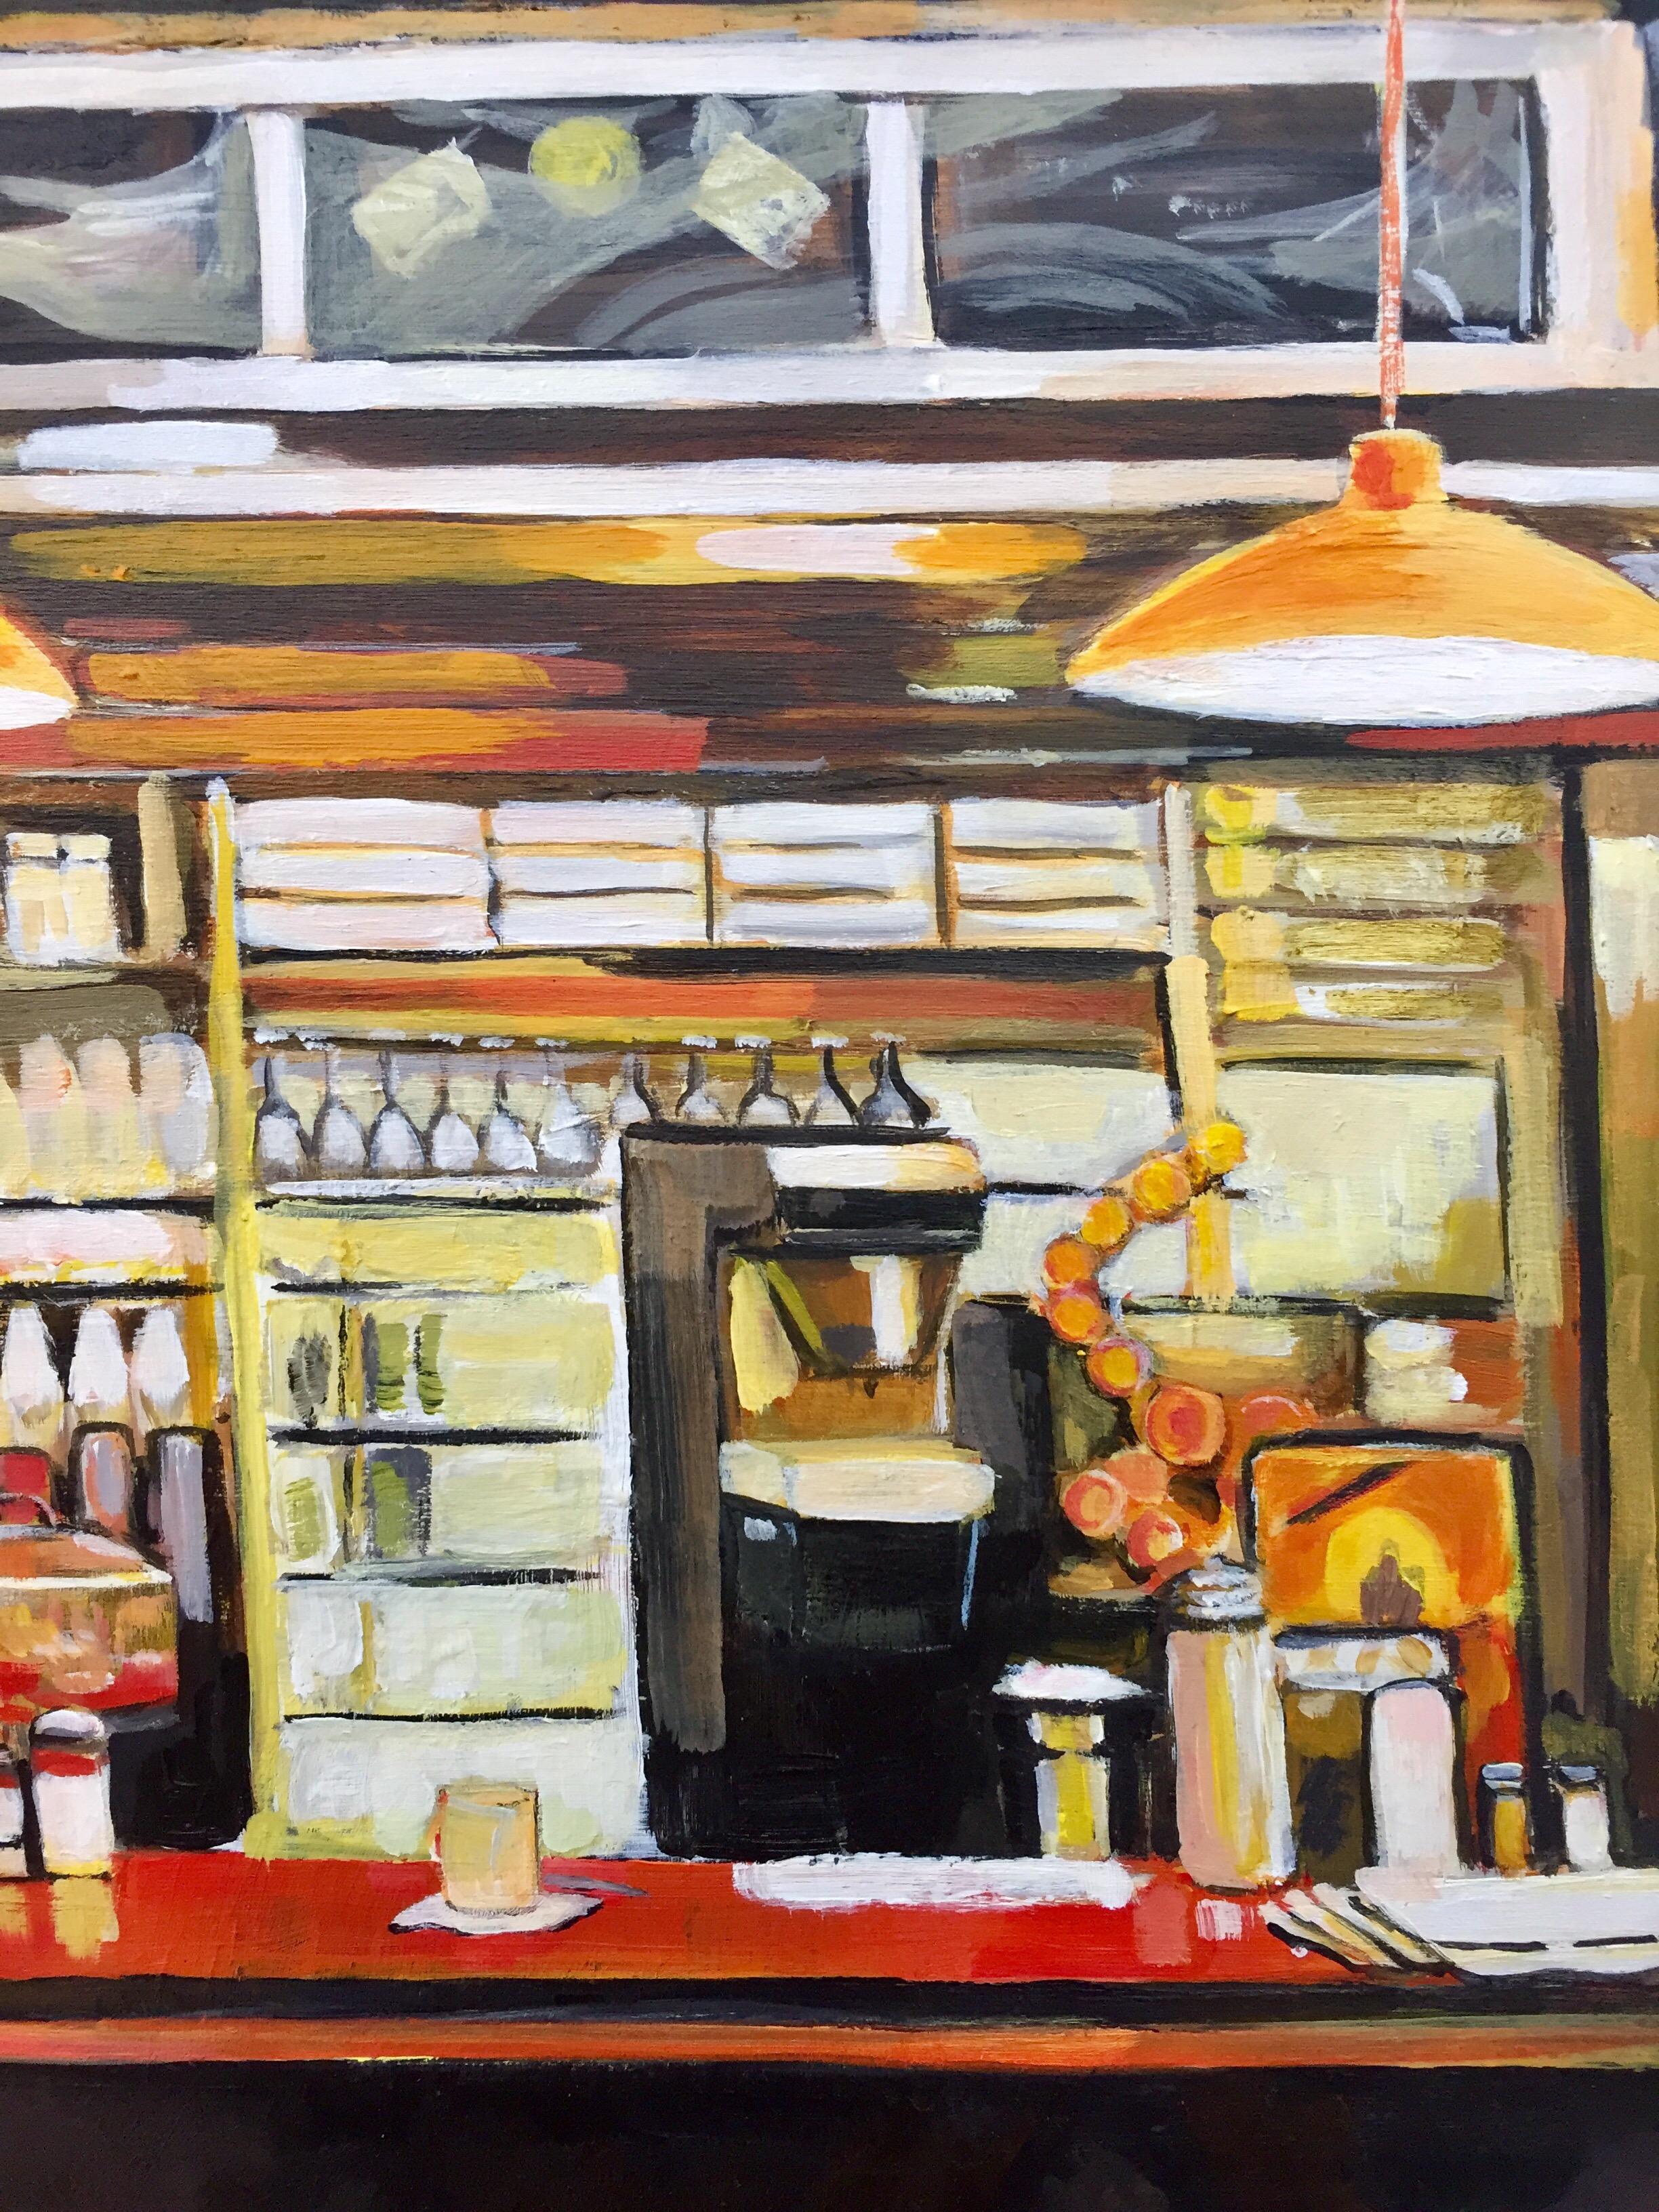 American Diner Still Life Painting by Leading British Urban Landscape Artist For Sale 2